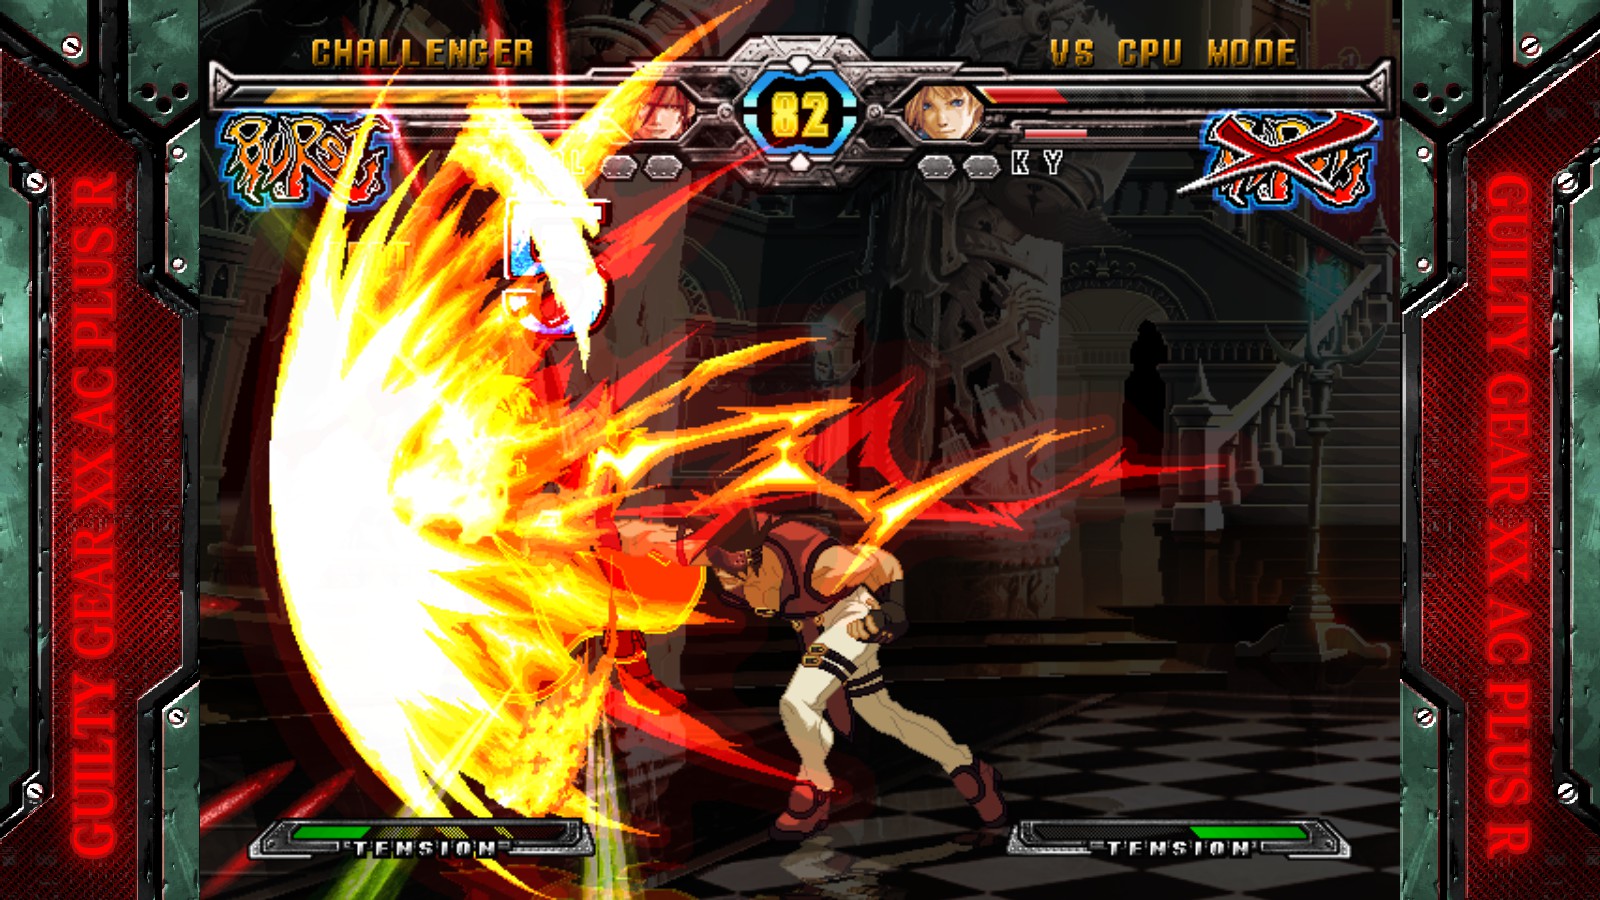 GUILTY GEAR XX ACCENT CORE PLUS R on Steam